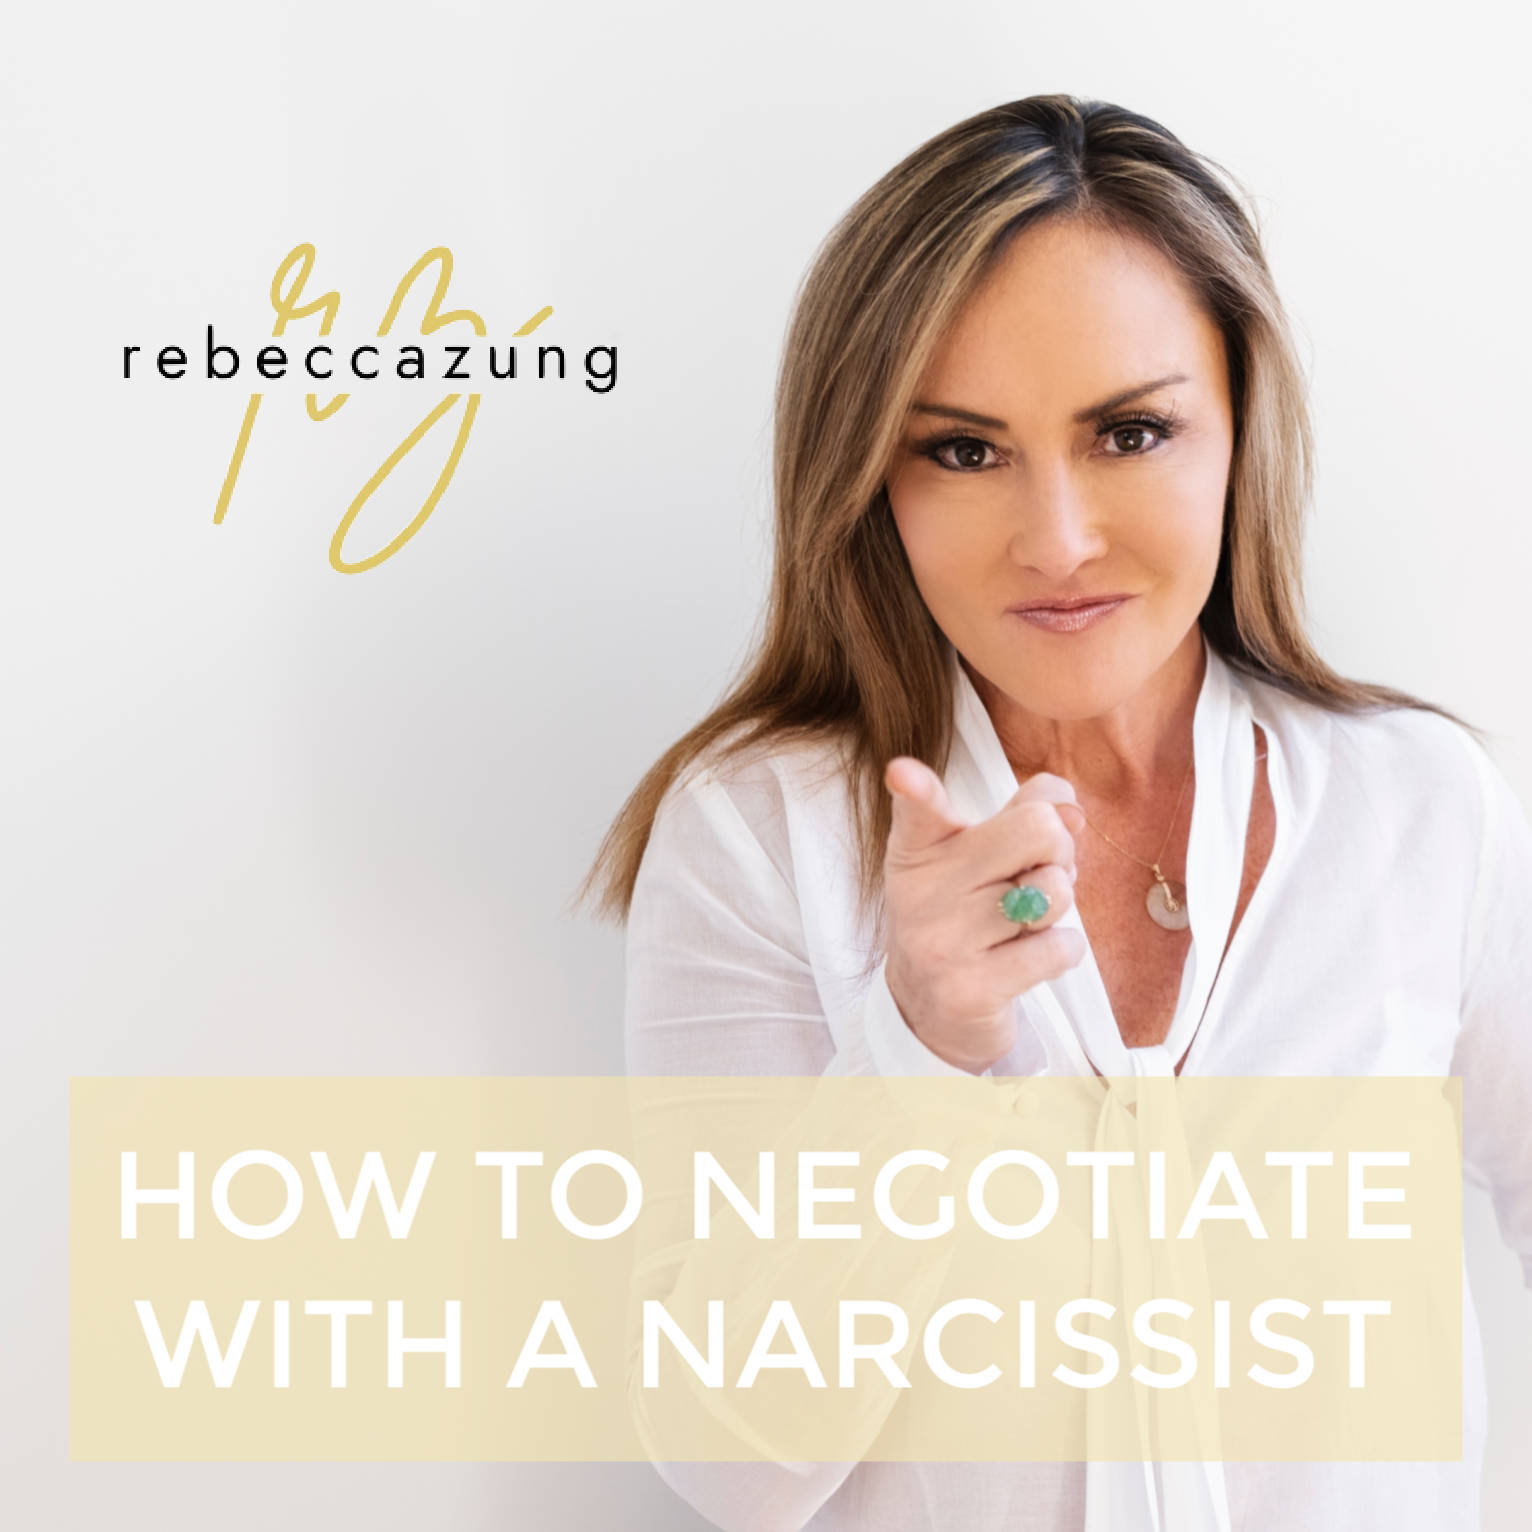 How to Negotiate With a Narcissist